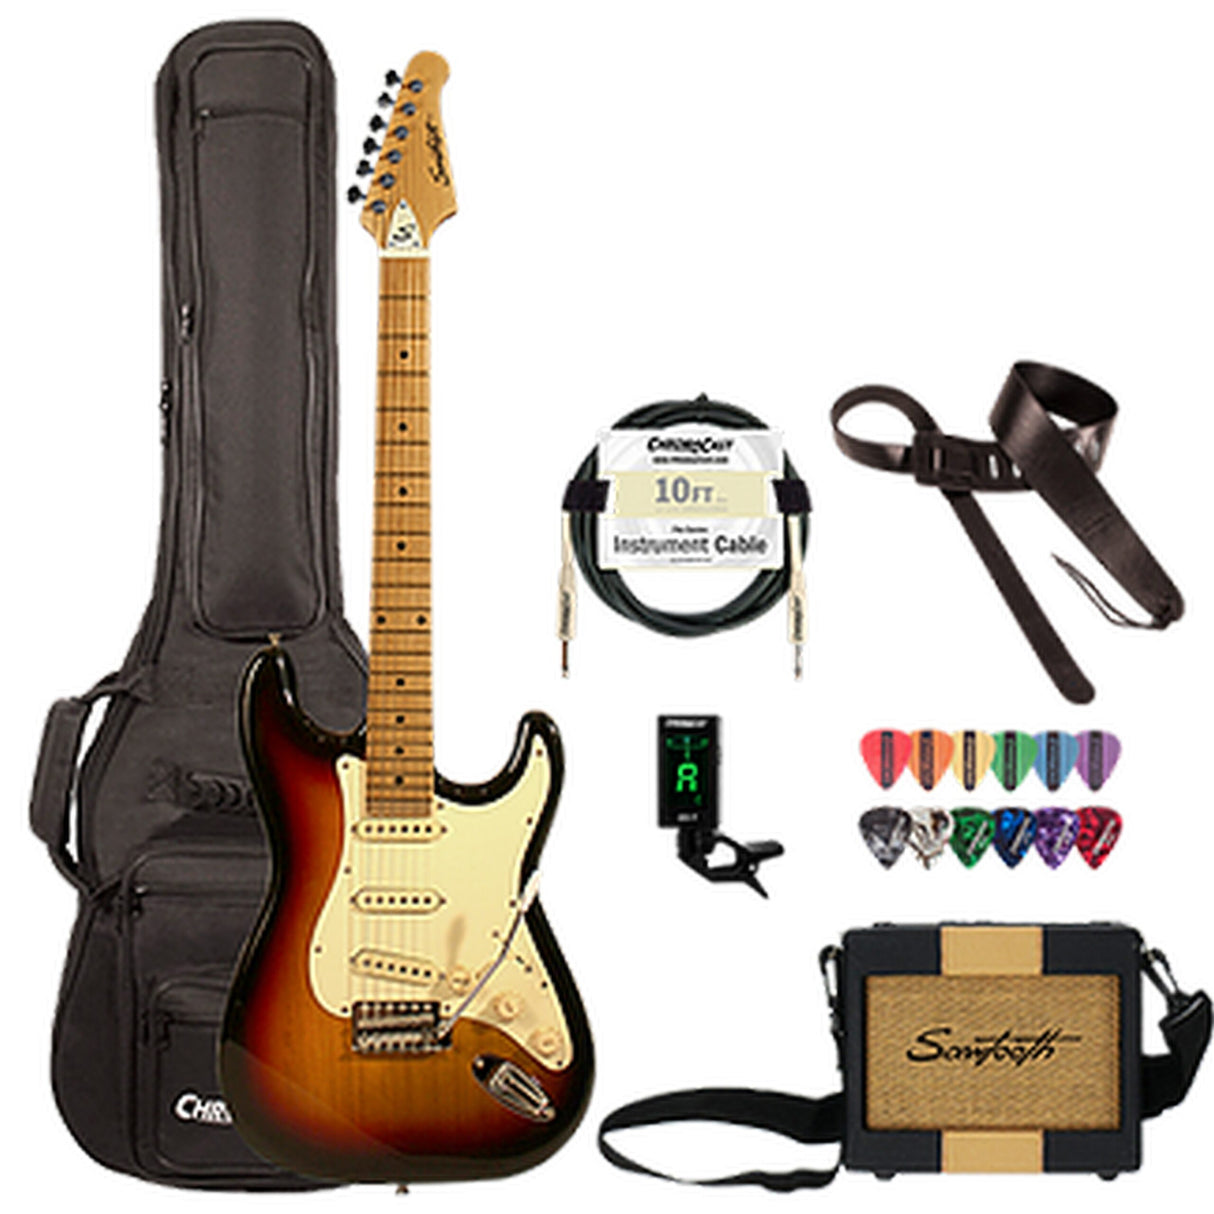 Sawtooth ST-ES-SBVC-KIT-2 ES Series Electric Guitar Travel Bundle with 5-Watt Amp, Padded Case, Cable Tuner and Picks, Sunburst